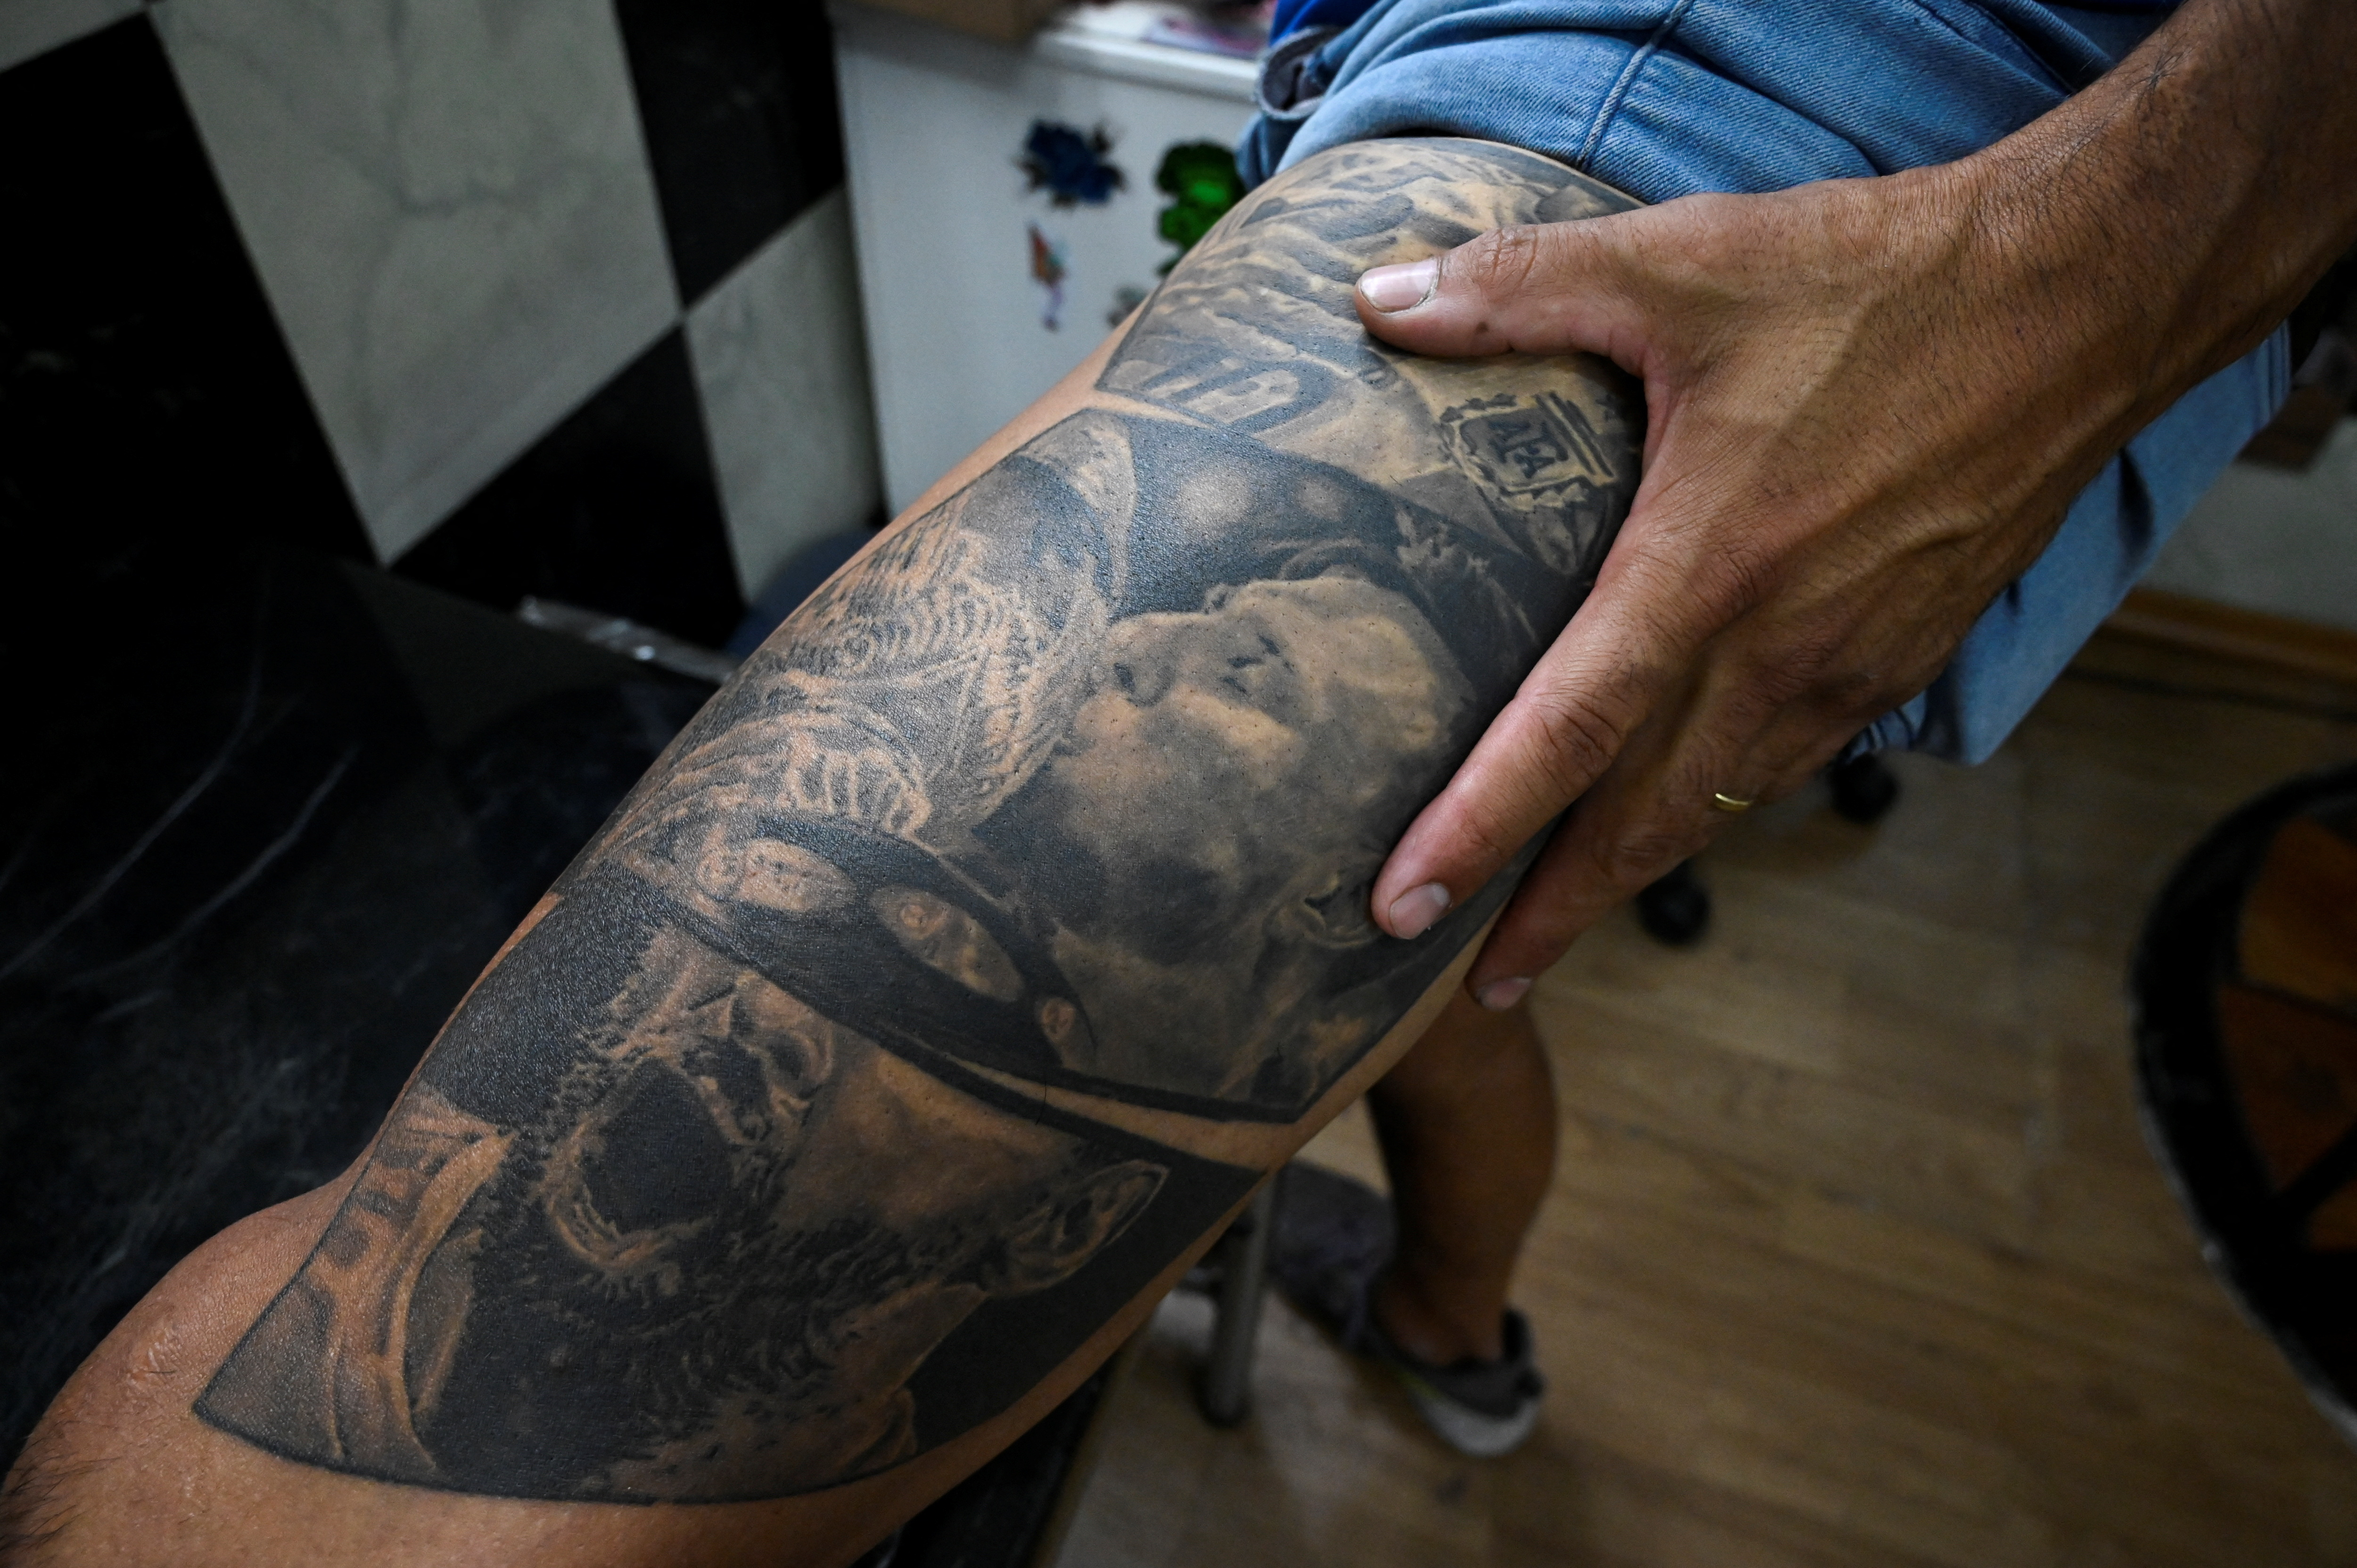 Argentine tattooists swamped by demand for Messi tributes